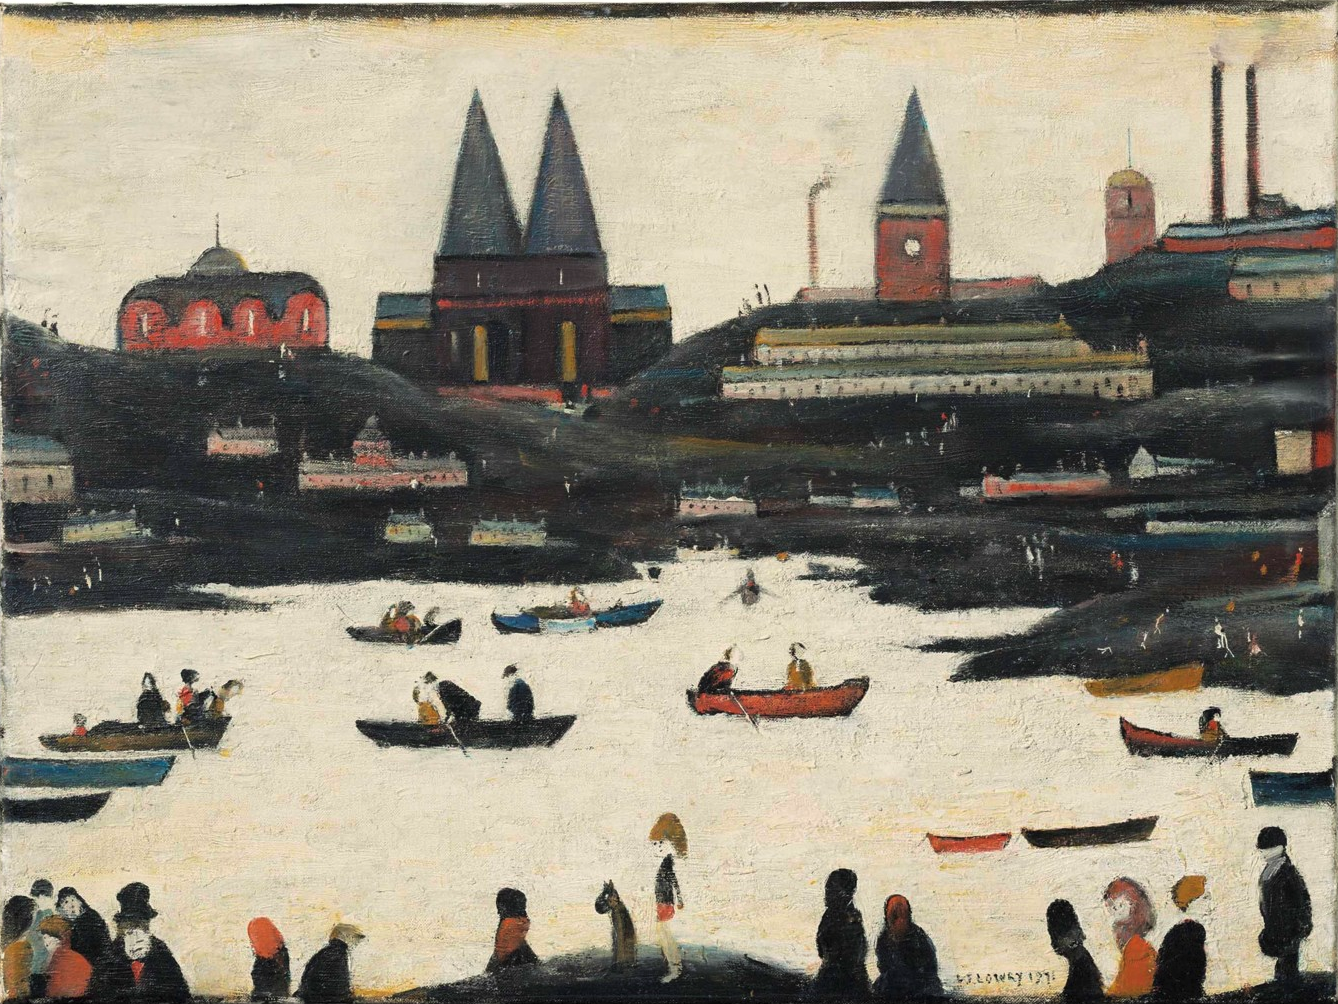 The Lake (1971) by Laurence Stephen Lowry (1887 - 1976), English artist.